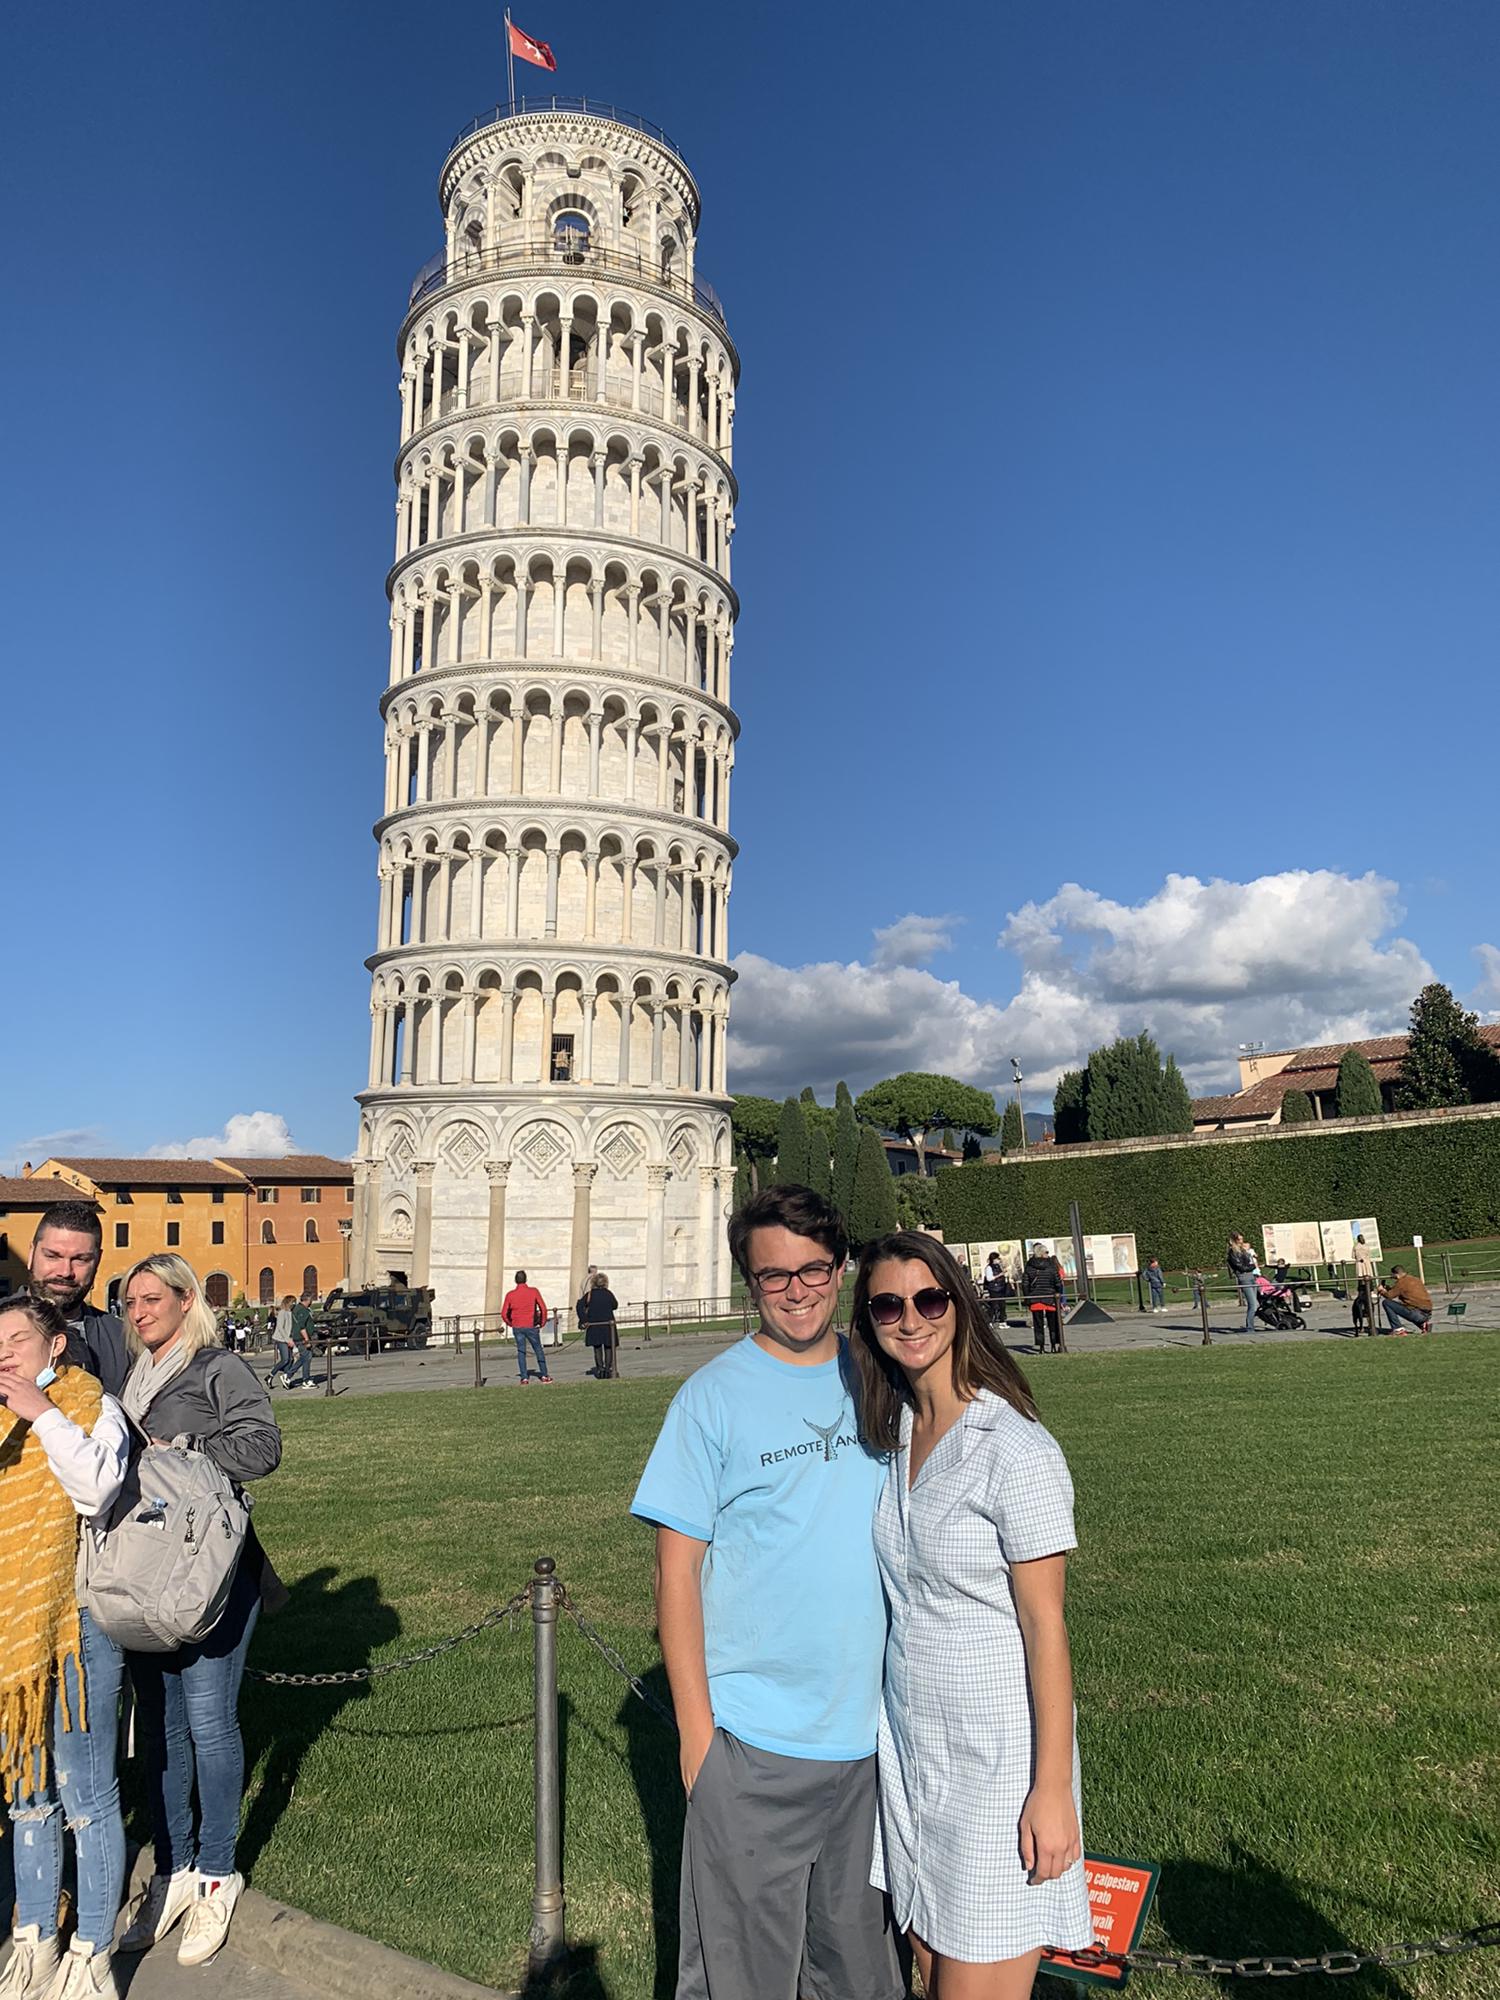 Leaning tower of Pisa on our way to Florence